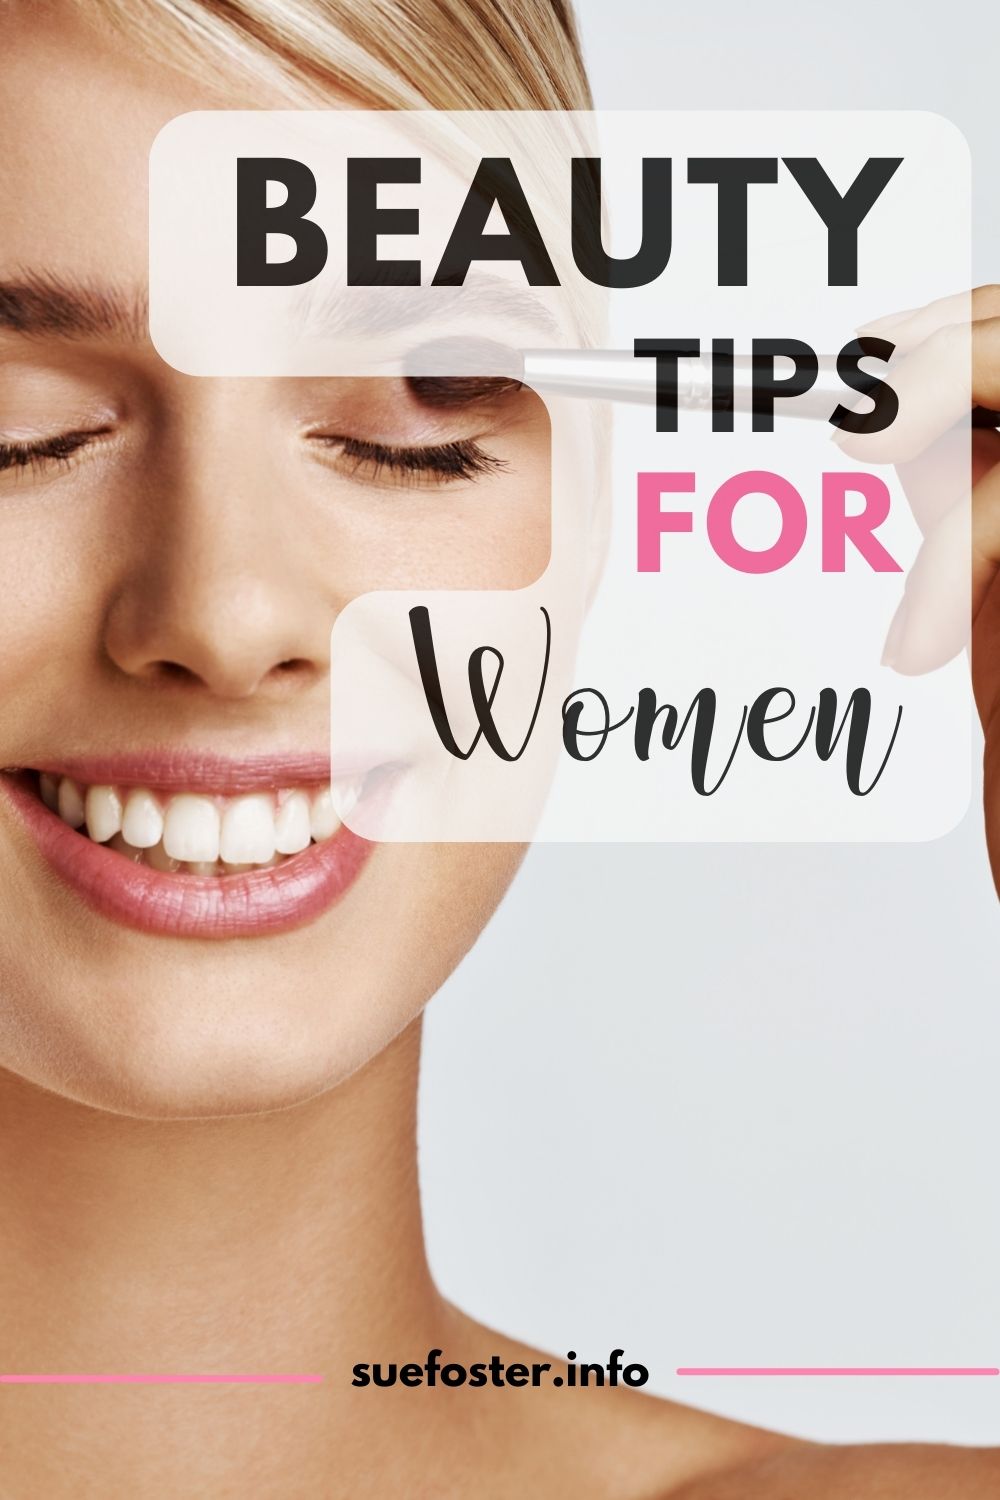 Enhancing beauty is important for women of all ages. With the right tips, you can look and feel more confident in your appearance.